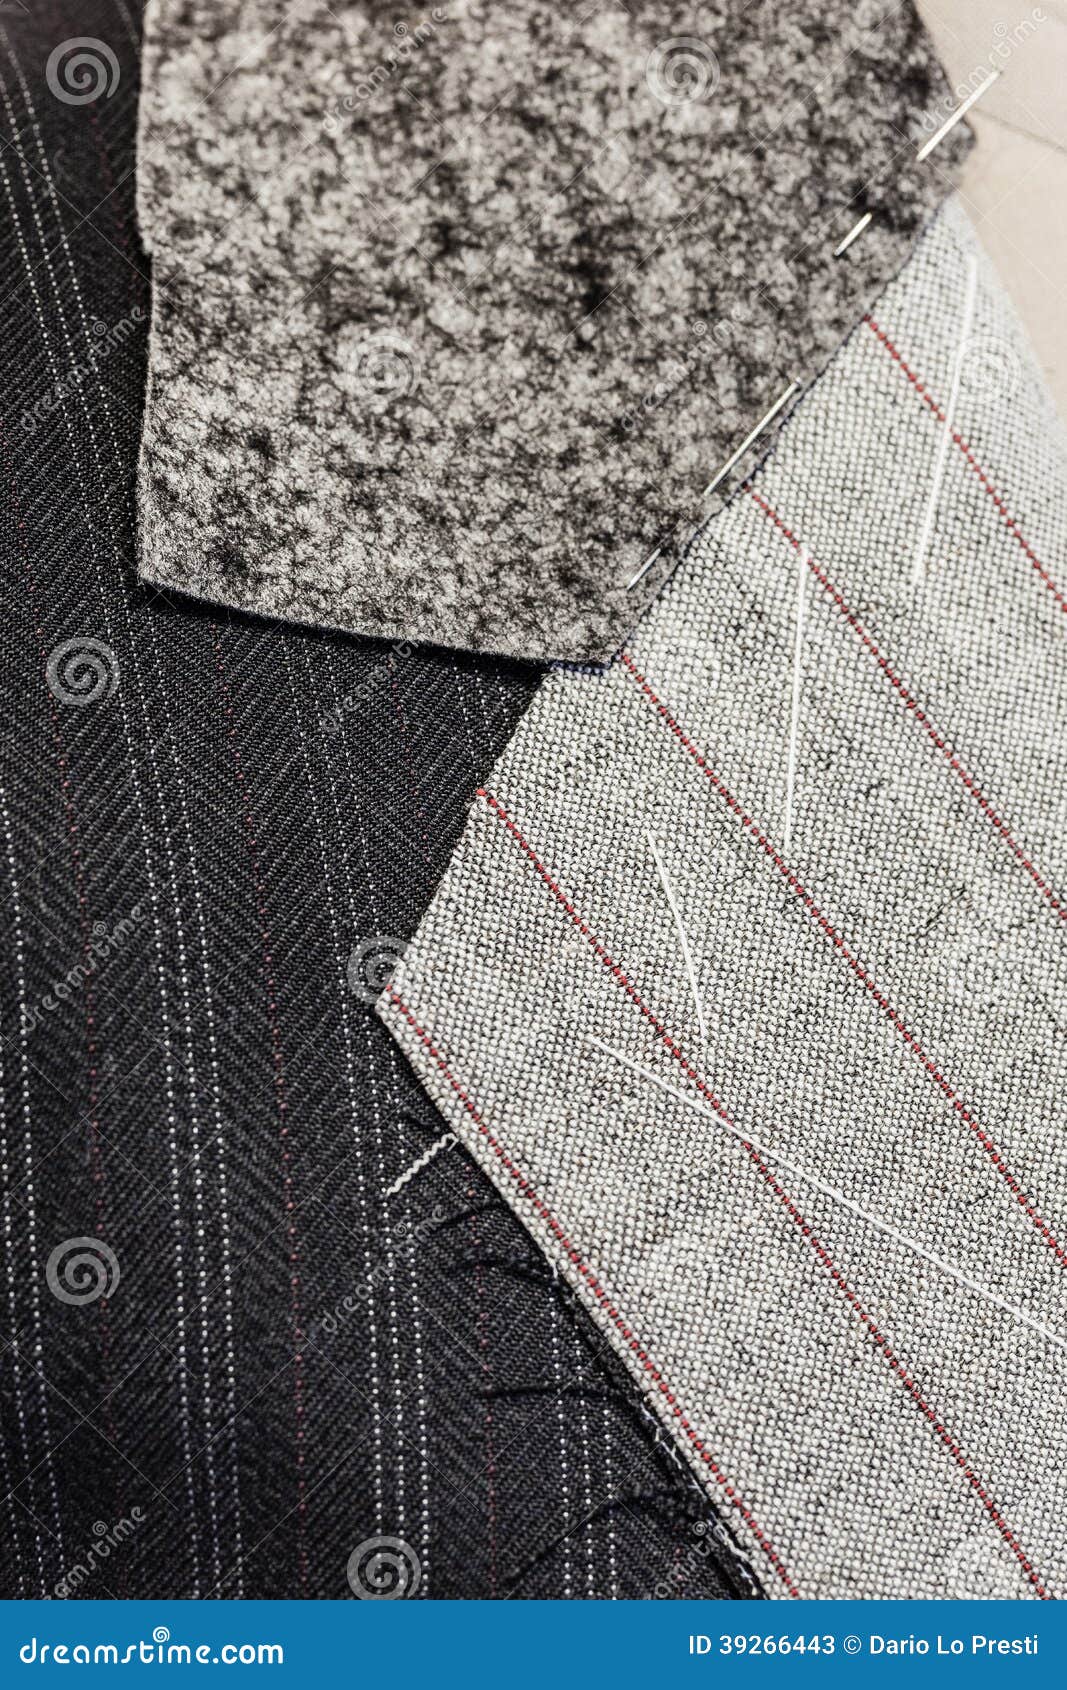 Stitching stock image. Image of business, detail, male - 39266443